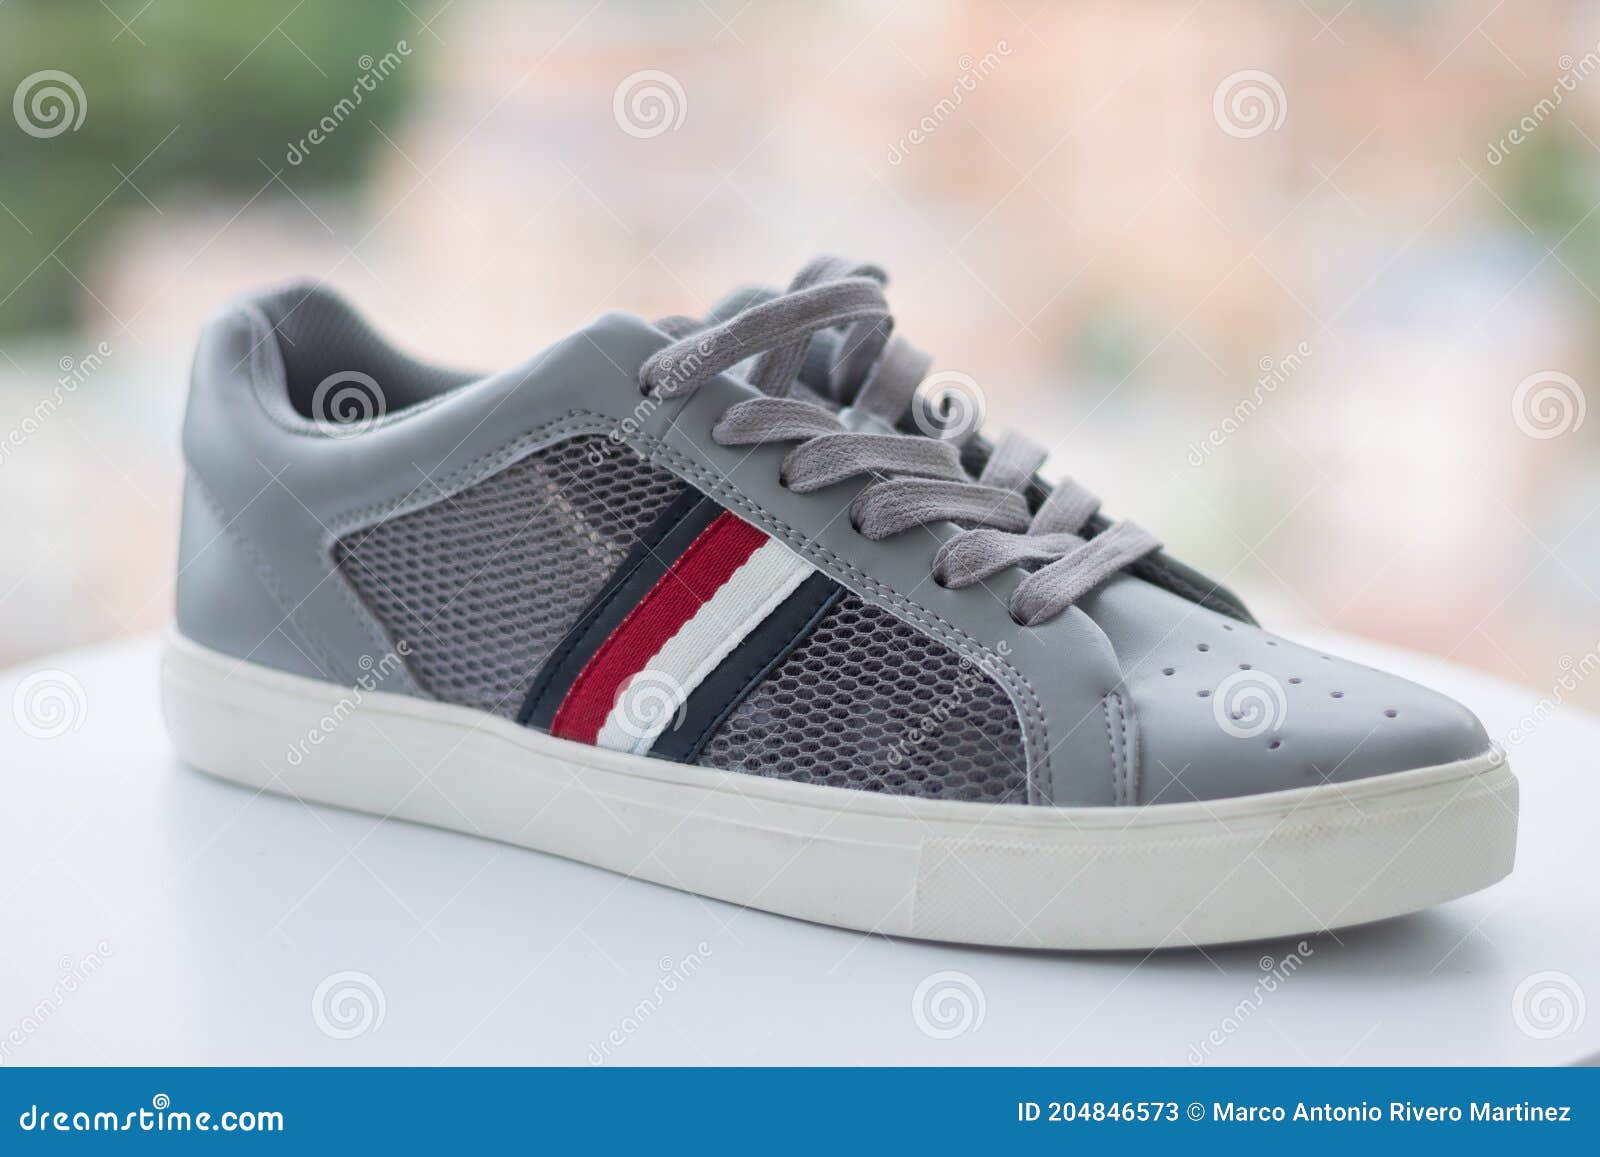 A Gray Tommy Hilfiger Shoe with Stripes Editorial Stock Photo - Image ...